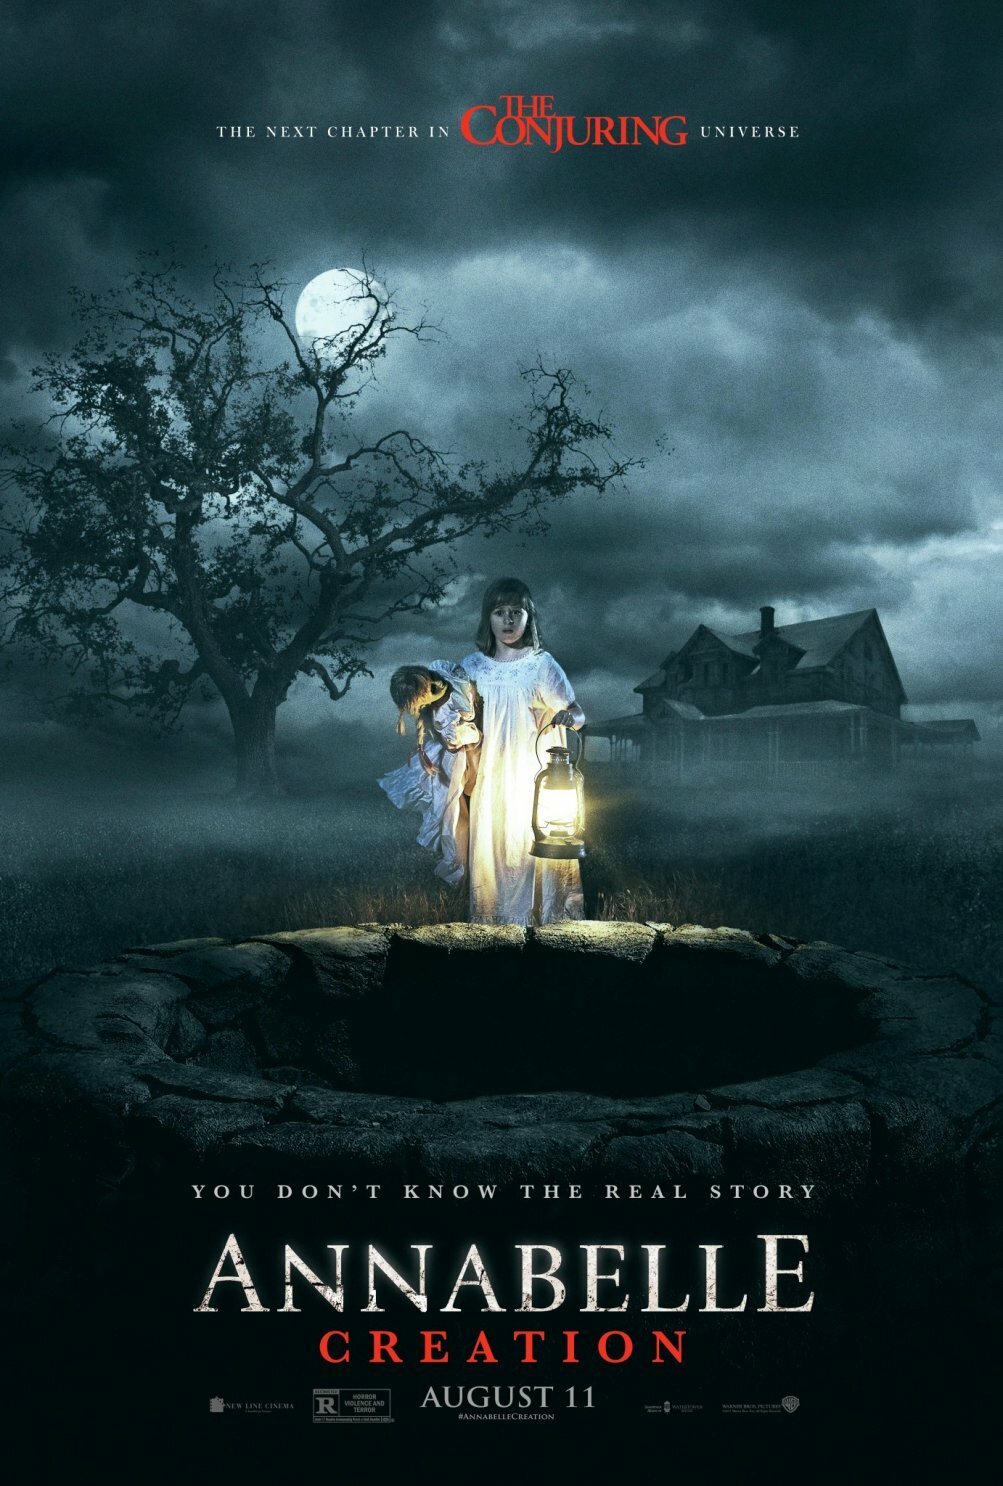 Annabelle 2: Creation poster ufficiale